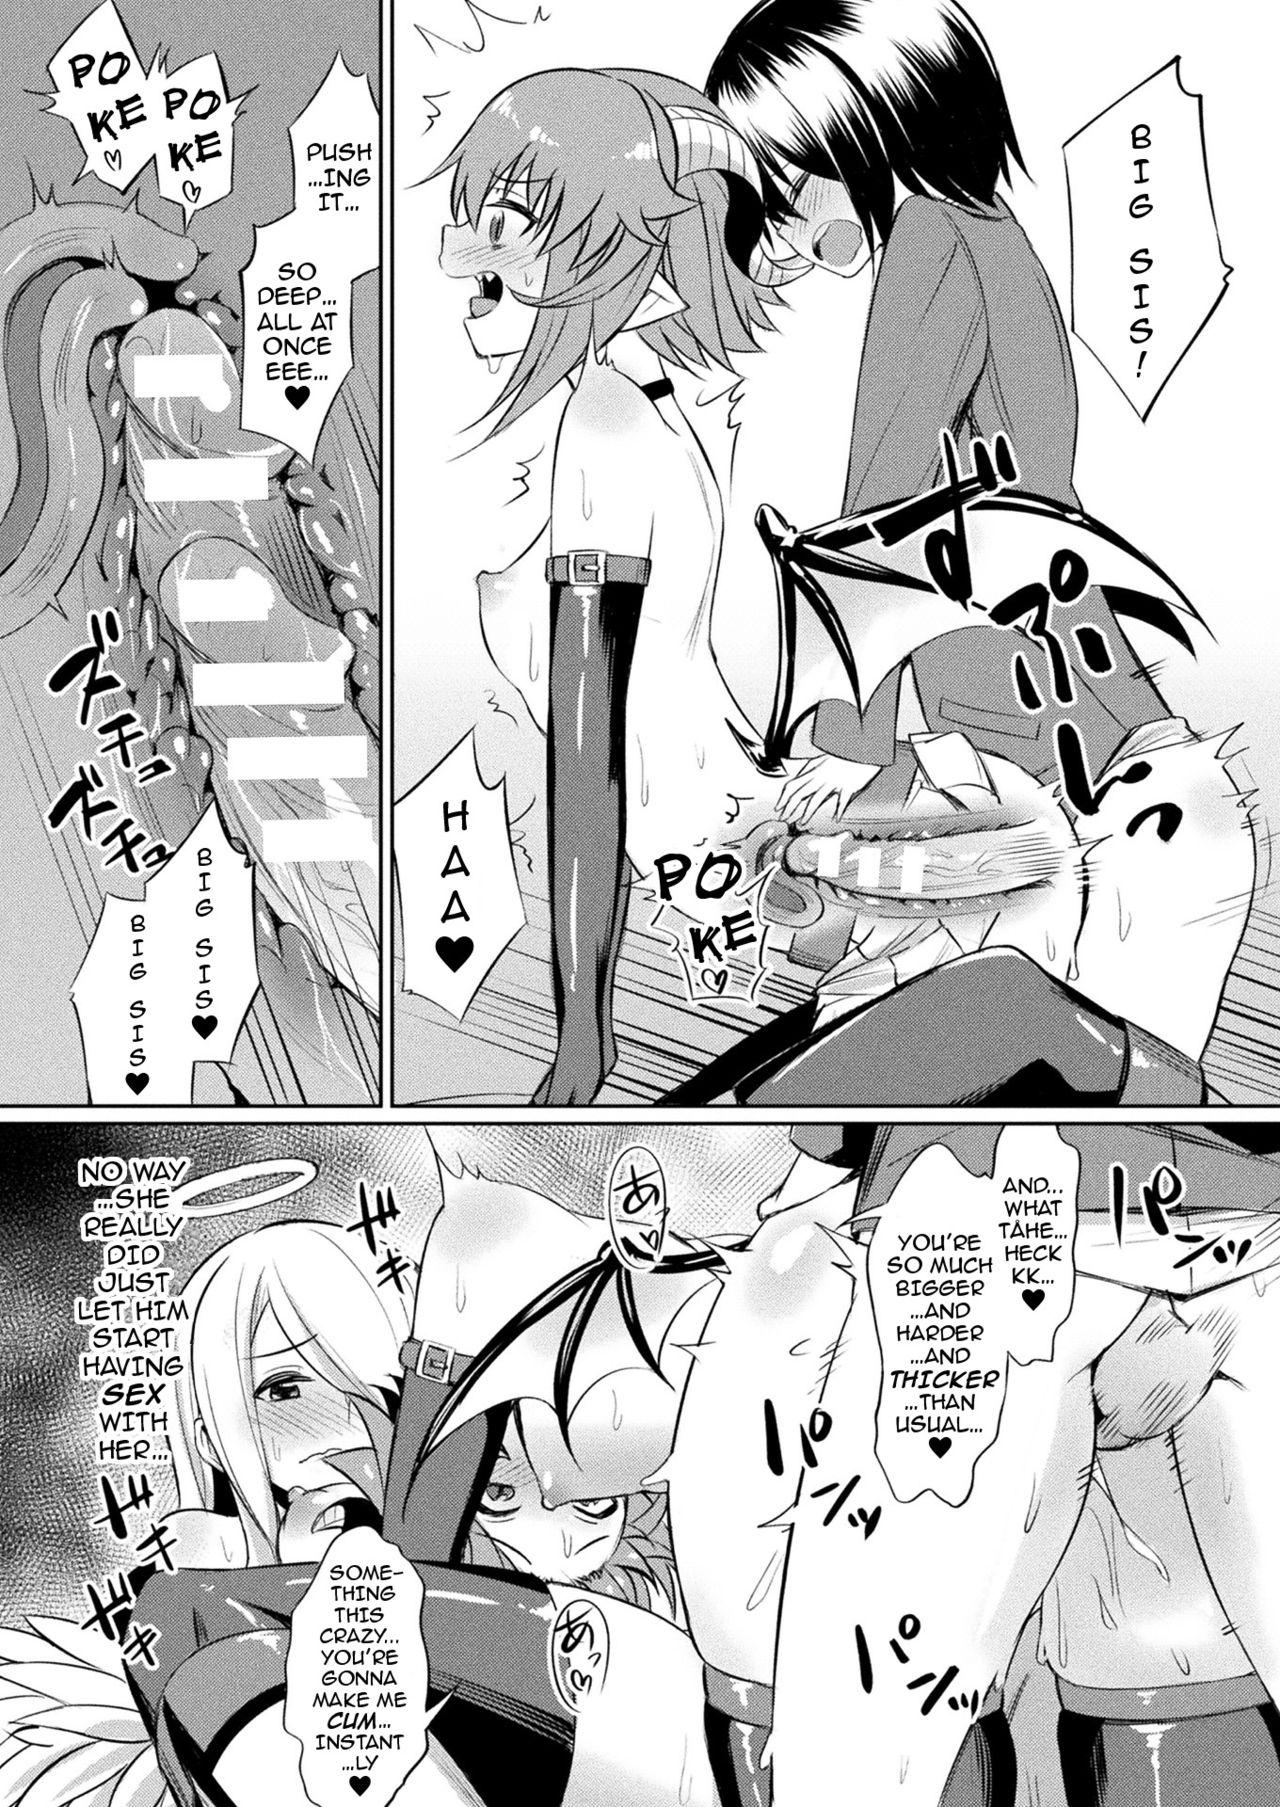 Hardcore Kimochii Rakuten Shiyo | Let’s Enjoy the Pleasures of FALLING FROM GRACE Together Clip - Page 10